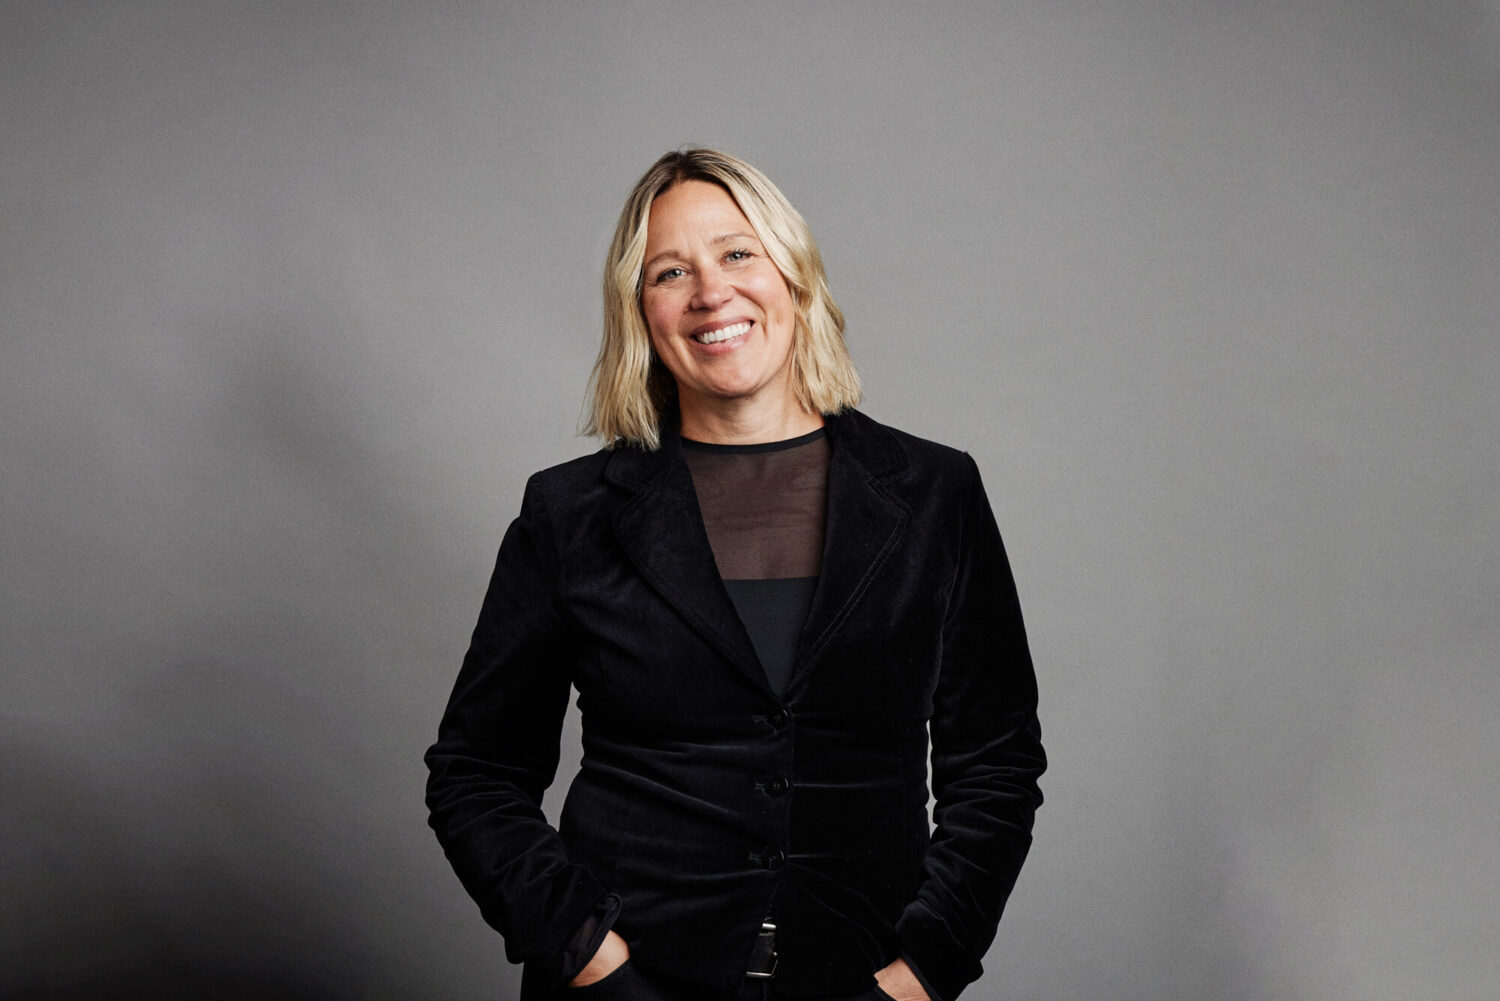 Corporate headshot by Photoform*. Smiling blonde woman wearing all black against a grey background.